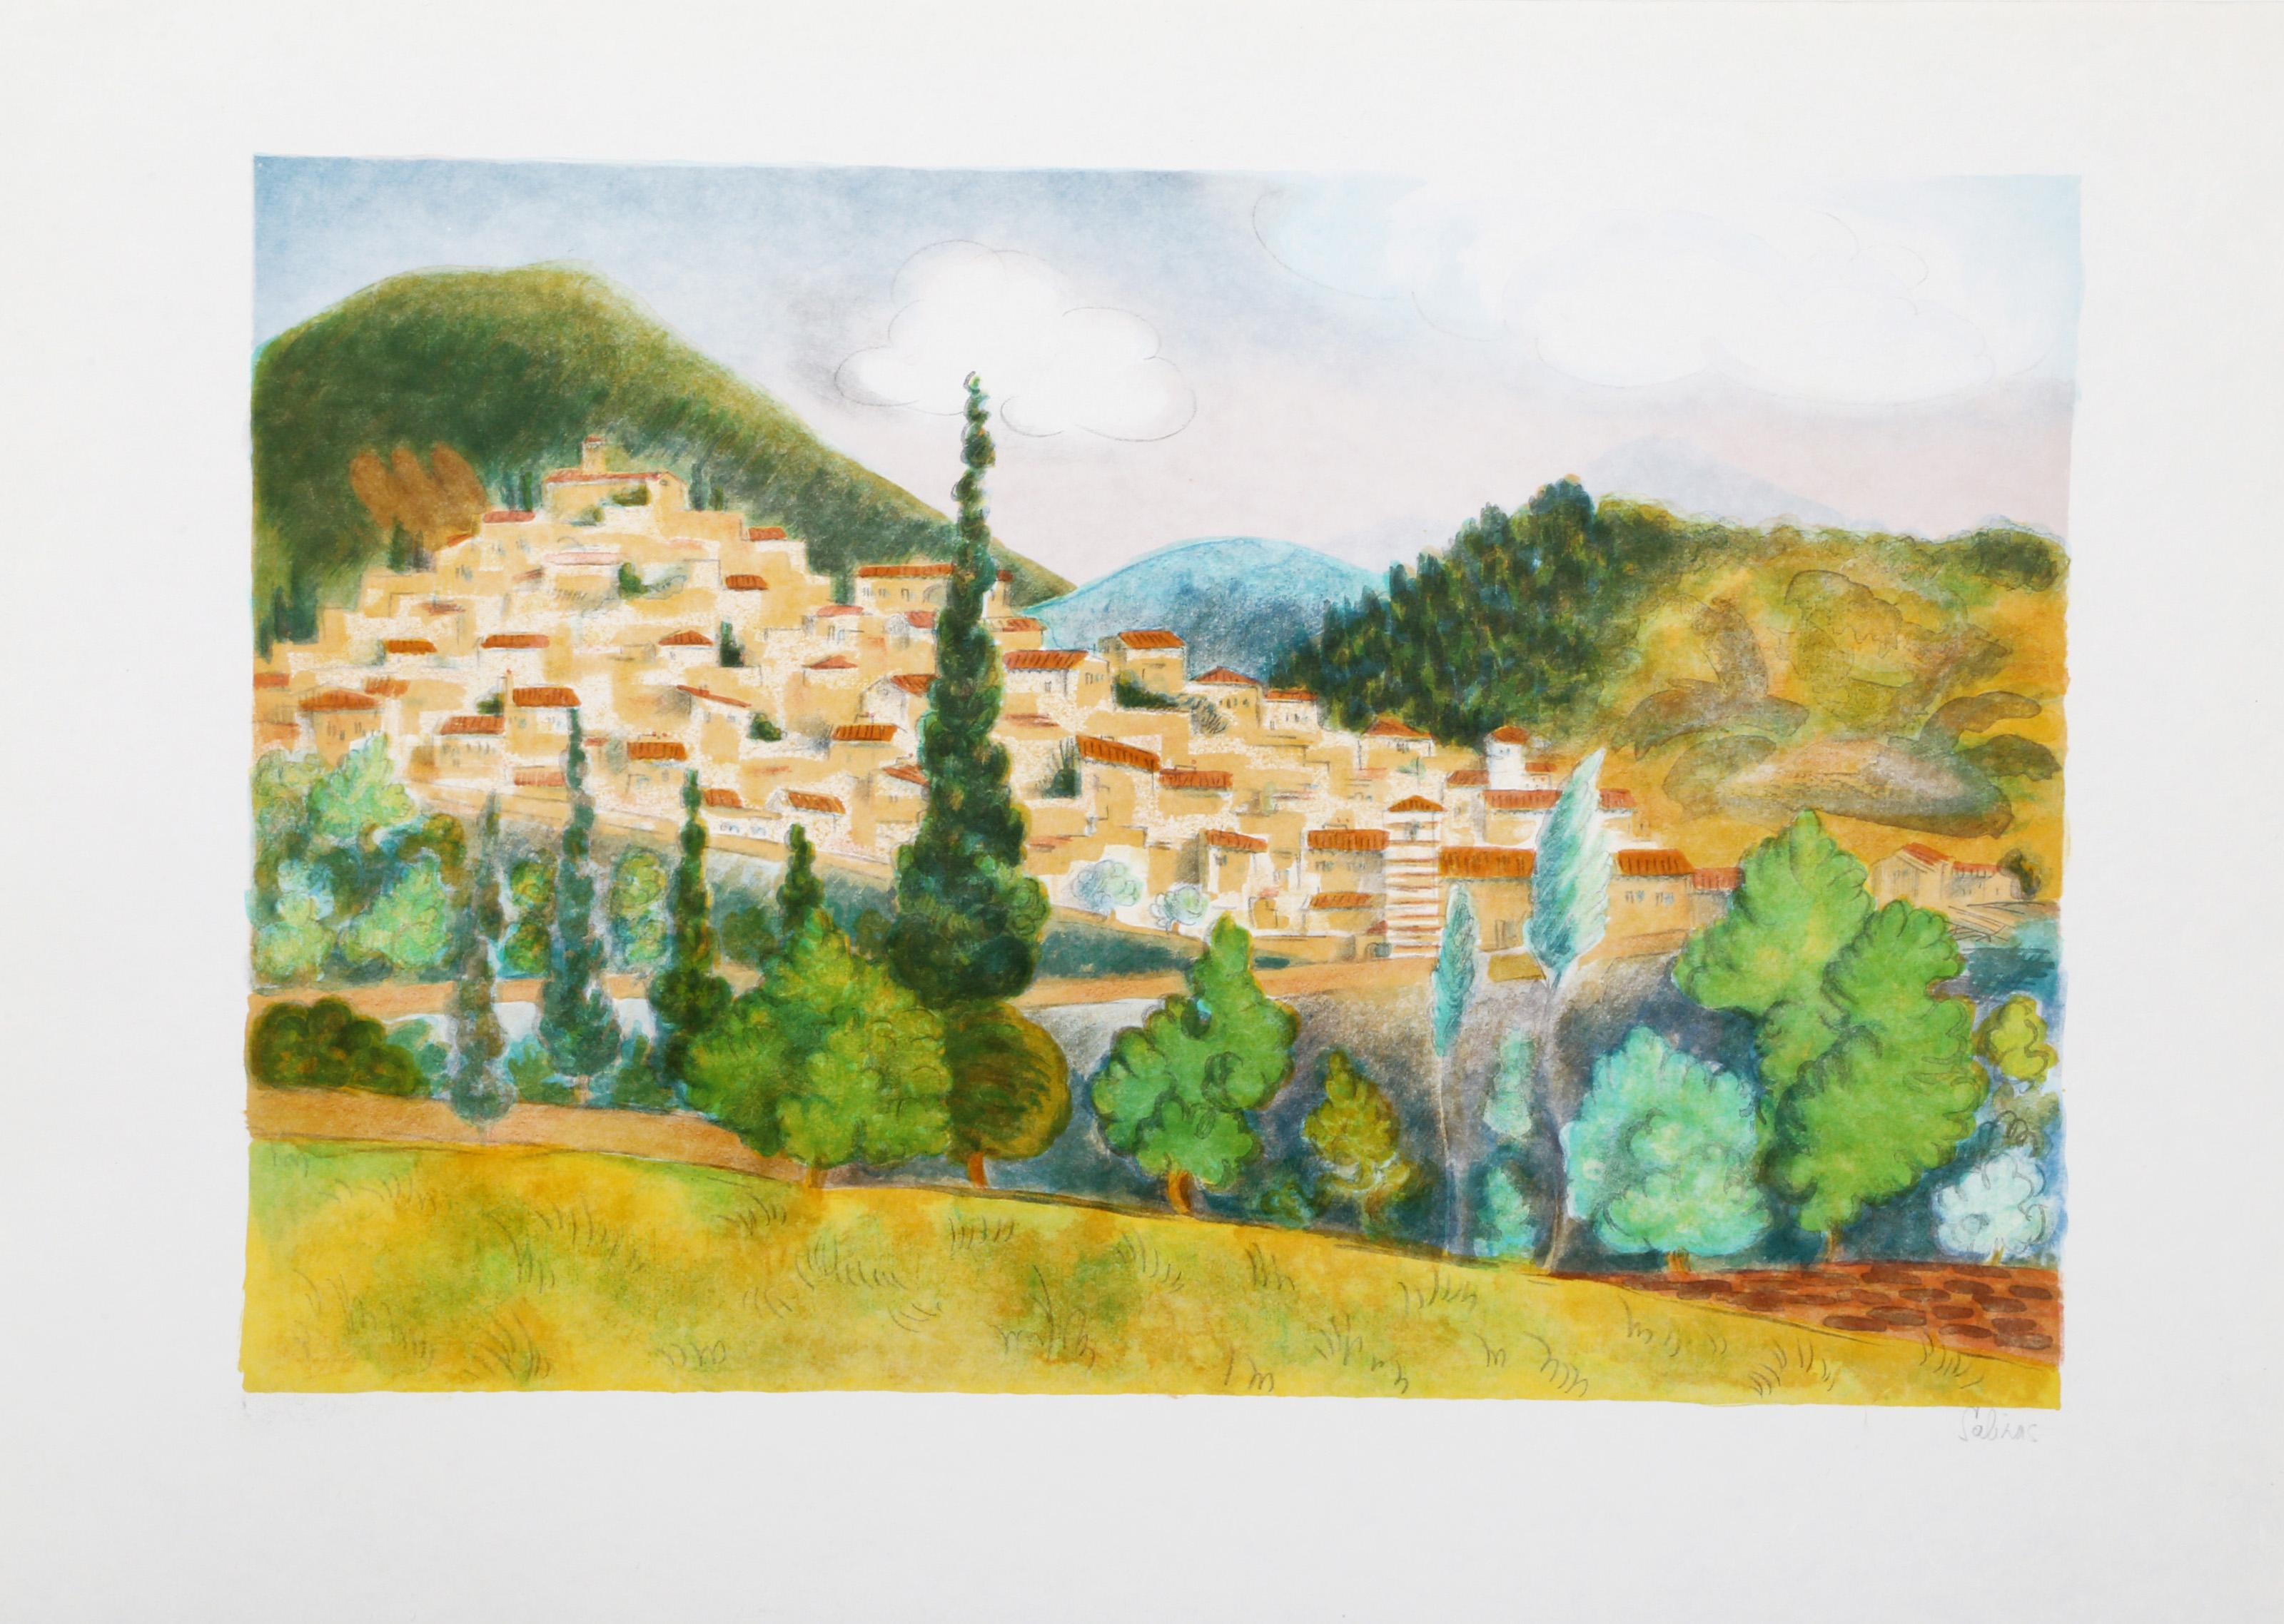 Laurent Marcel Salinas, Egyptian/French (1913 - 2010) -  Village Landscape. Year: circa 1980, Medium: Lithograph on Japon paper, signed in pencil, Edition: EA, Image Size: 16 x 23 inches, Size: 21  x 30 in. (53.34  x 76.2 cm) 